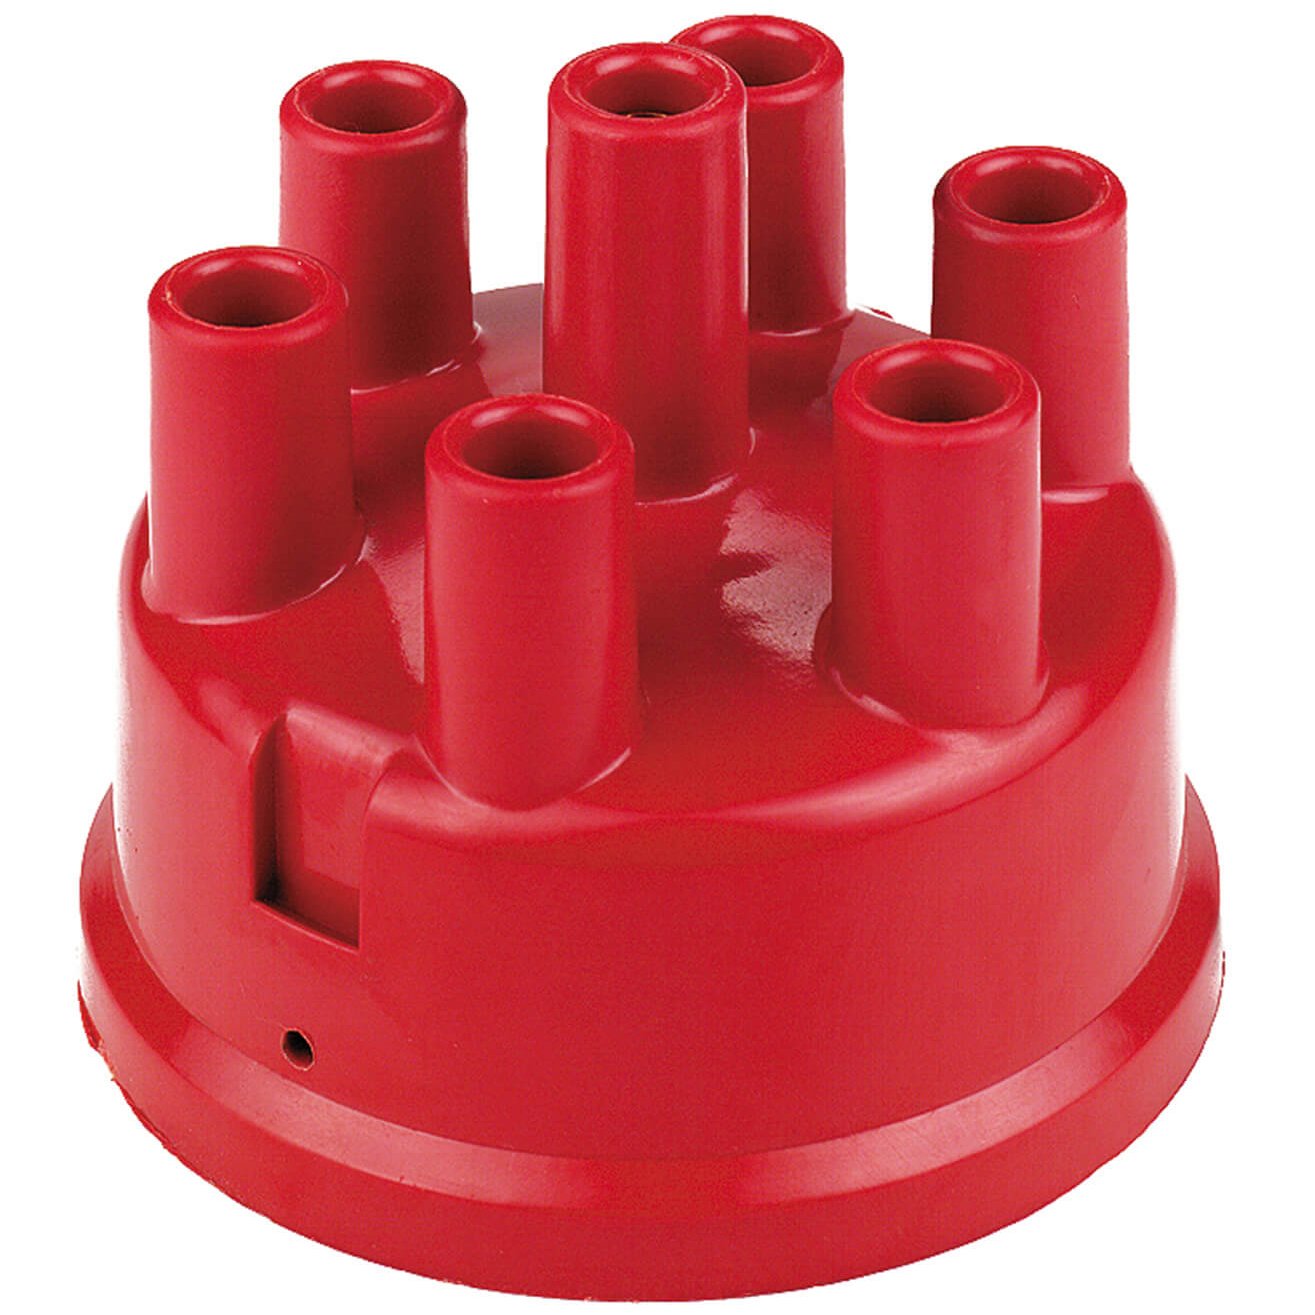 Female Distributor Cap For Mallory Series 23, 24, 27, 45, 46, 47, 50, 57, & vented non-flame arrested YL